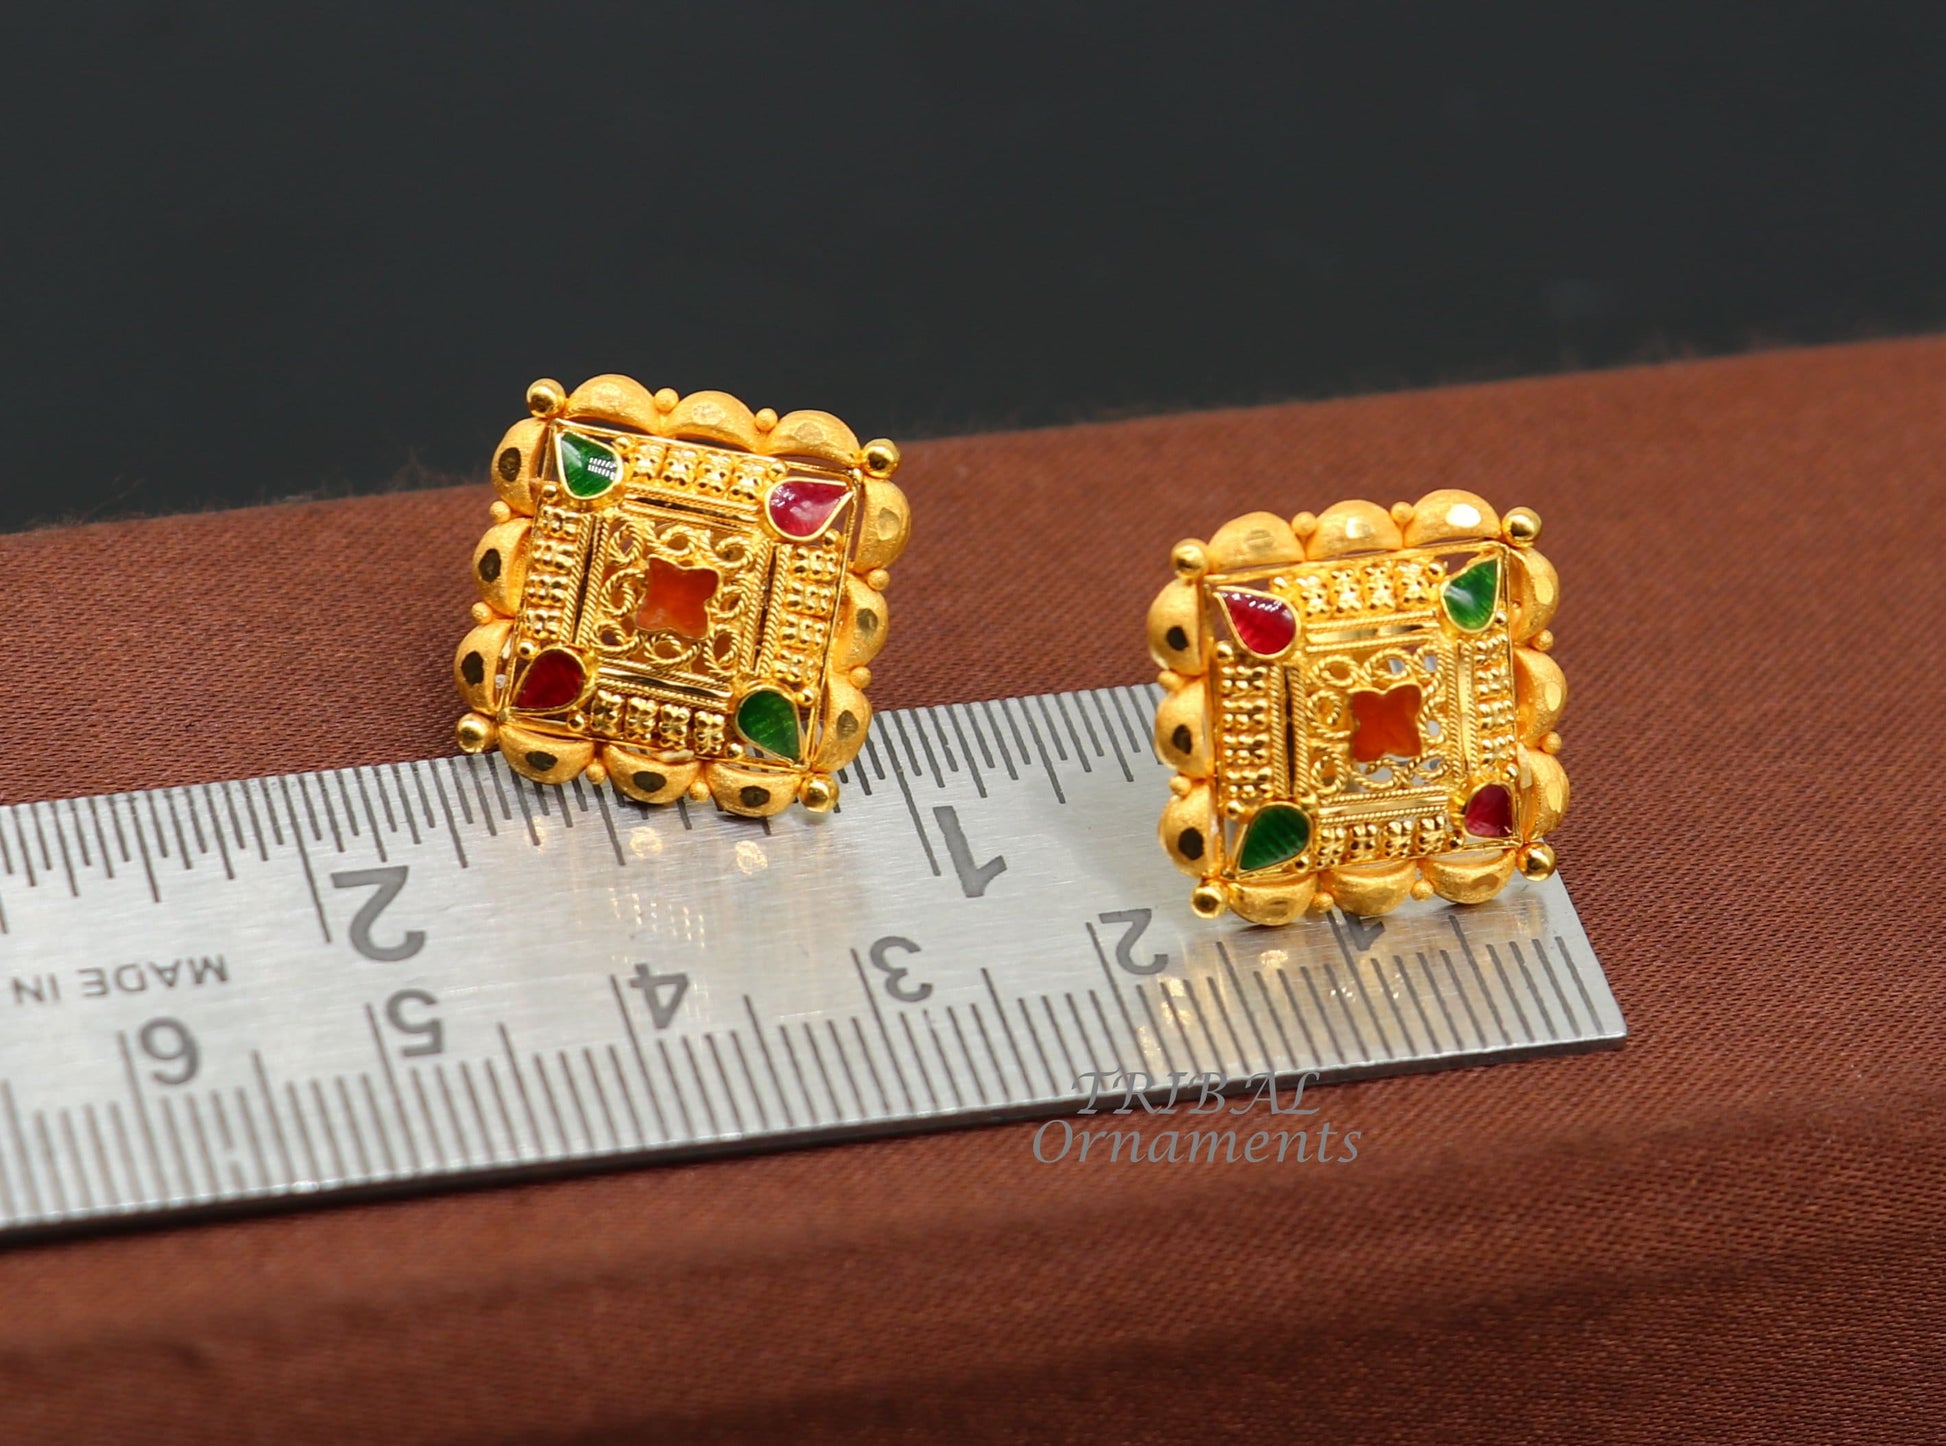 Indian traditional design handmade fabulous flower design 22k 22 carat yellow gold hand carved  stud earring for women's jewelry ER166 - TRIBAL ORNAMENTS